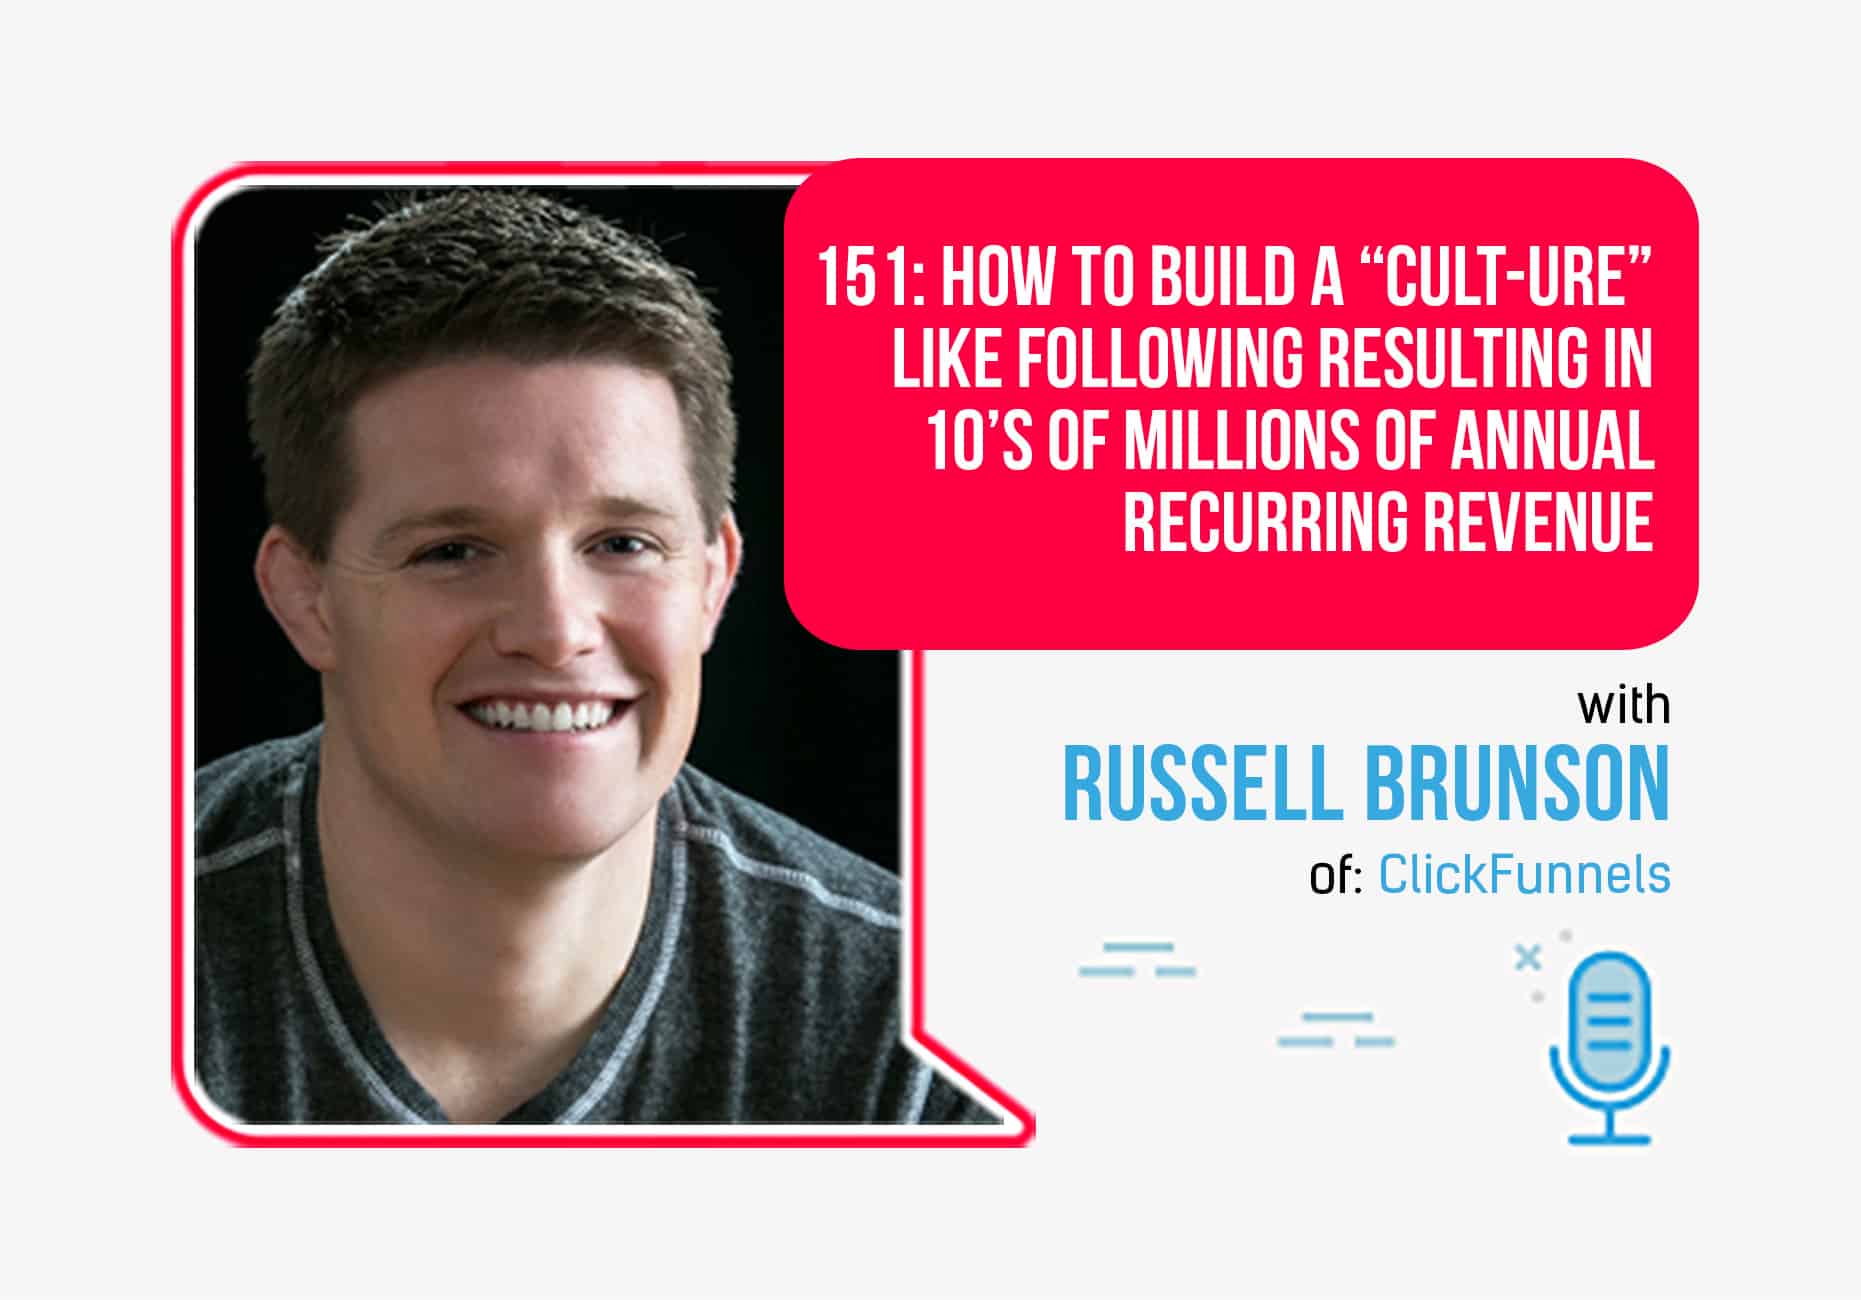 How How Much Does The Inner Circle Cost For Russel Brunsons Clickfunnels can Save You Time, Stress, and Money.